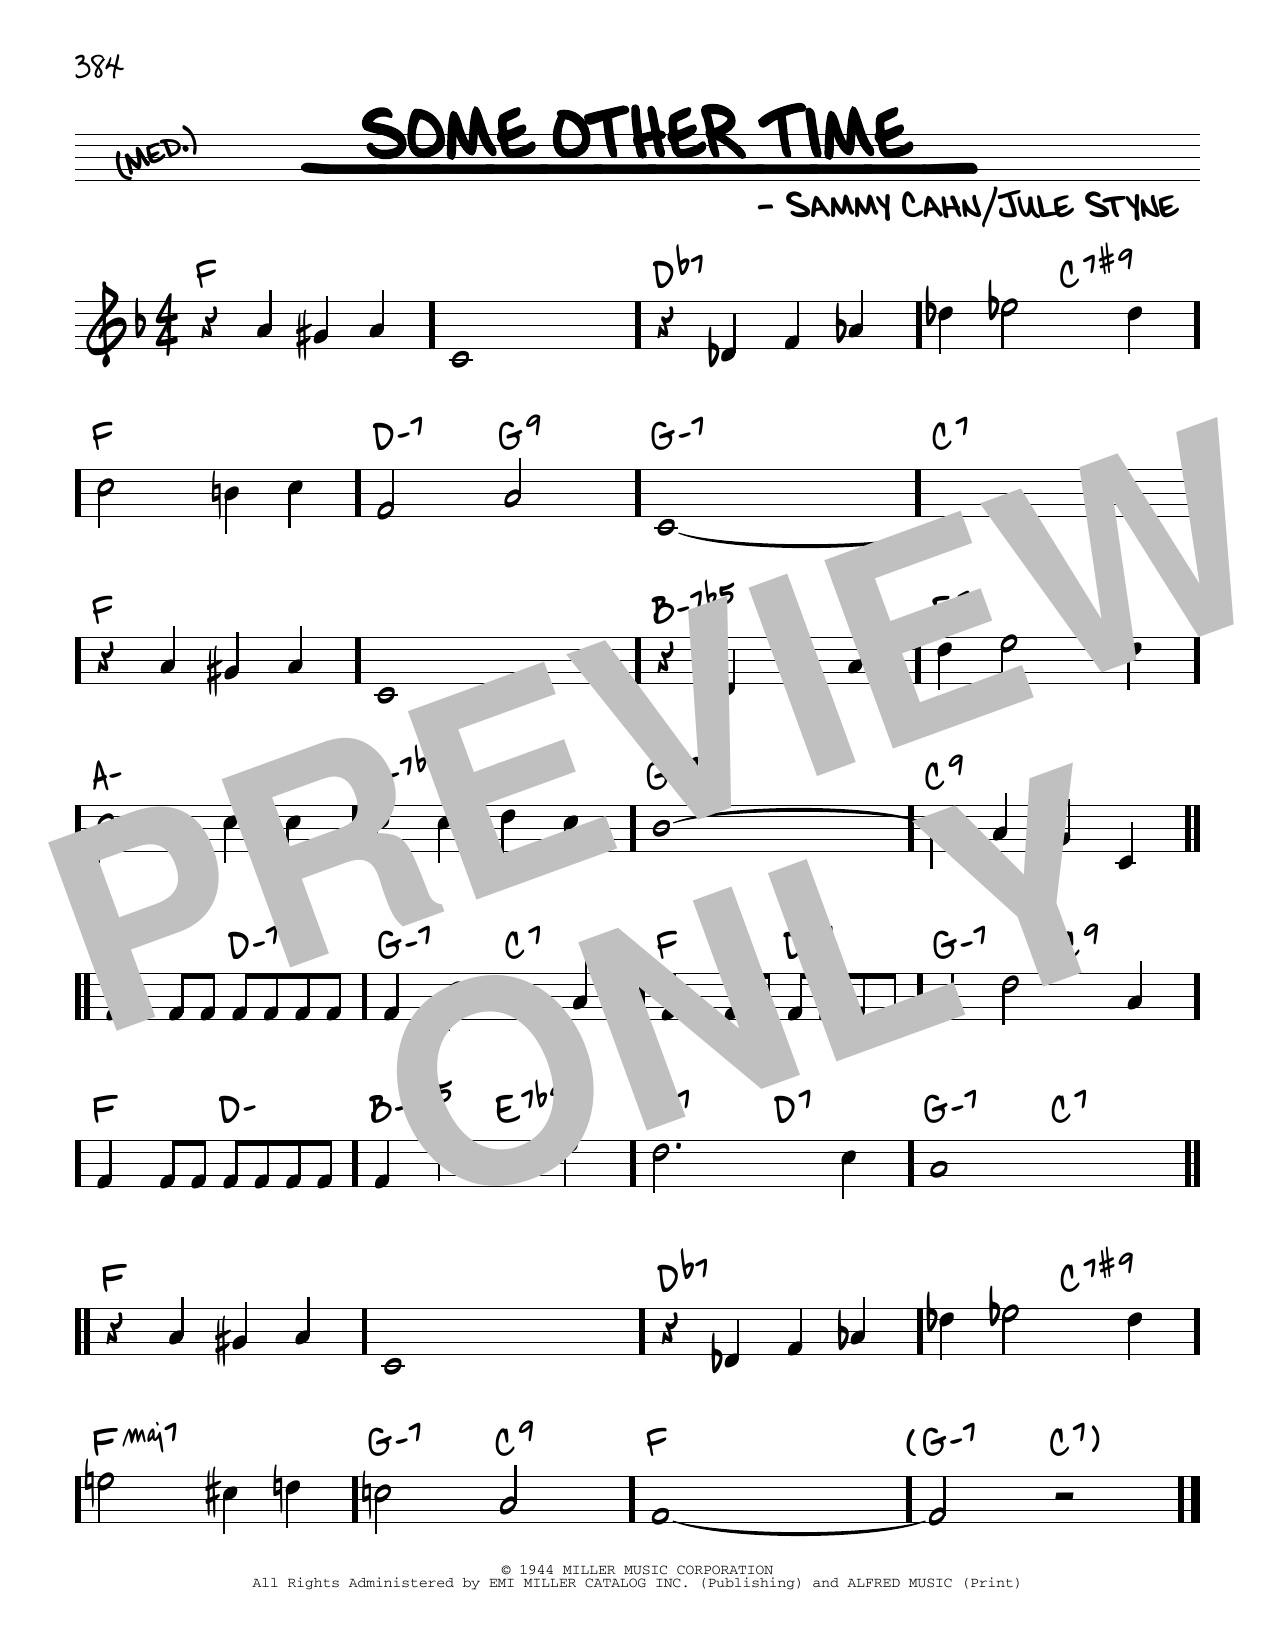 Download Jule Styne Some Other Time Sheet Music